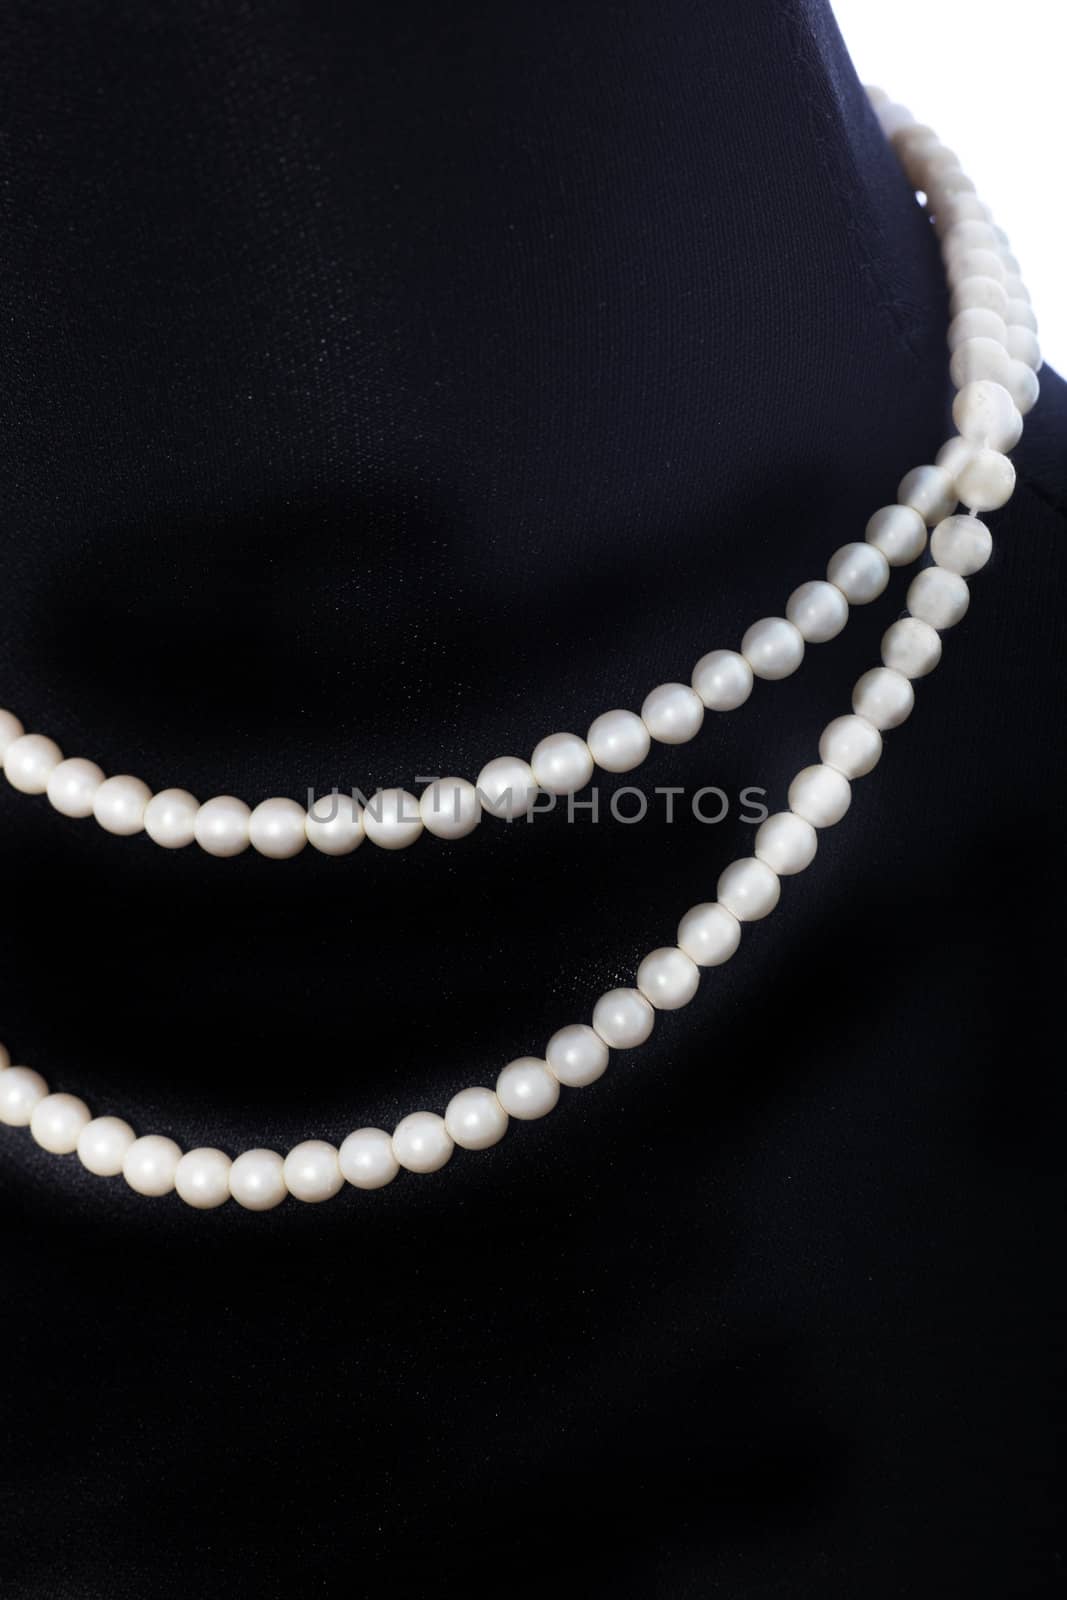 Double string of matched pearls displayed around the neck of a black mannequin